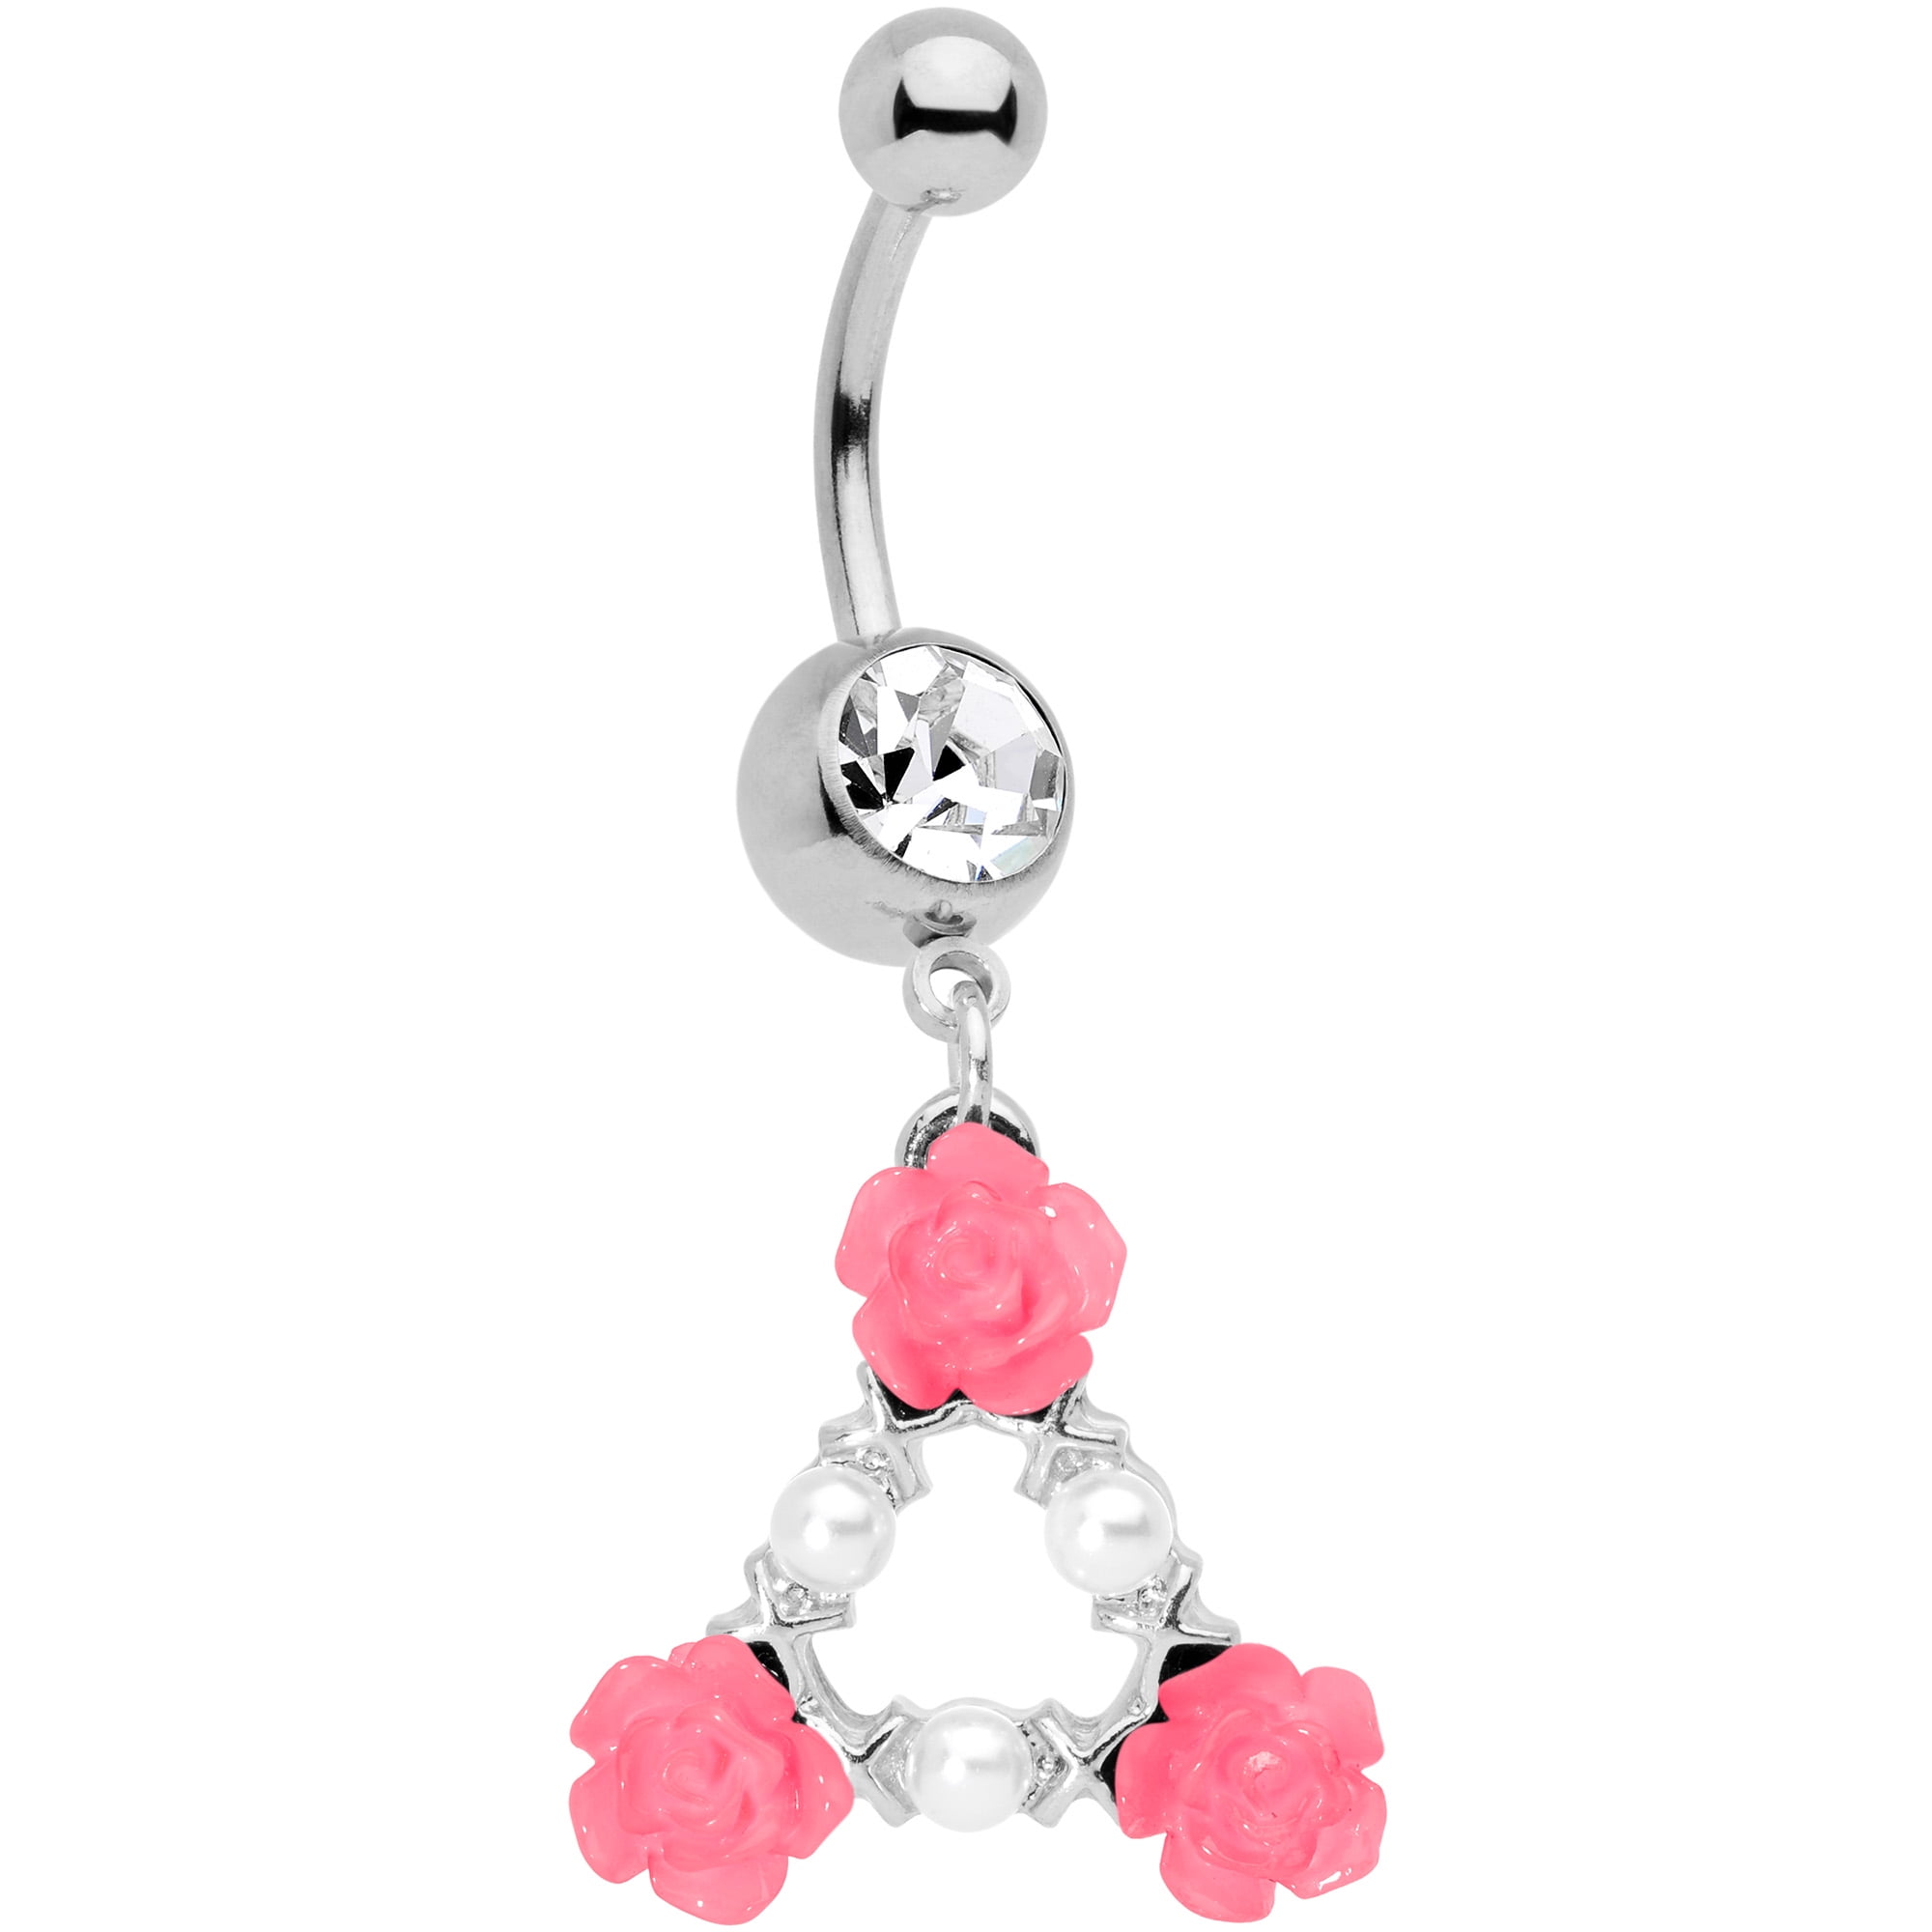 Saengthong Surgical Steel Navel Rings Crystal Belly Button Ring Bar Piercing Jewelry Beauty Color Rose